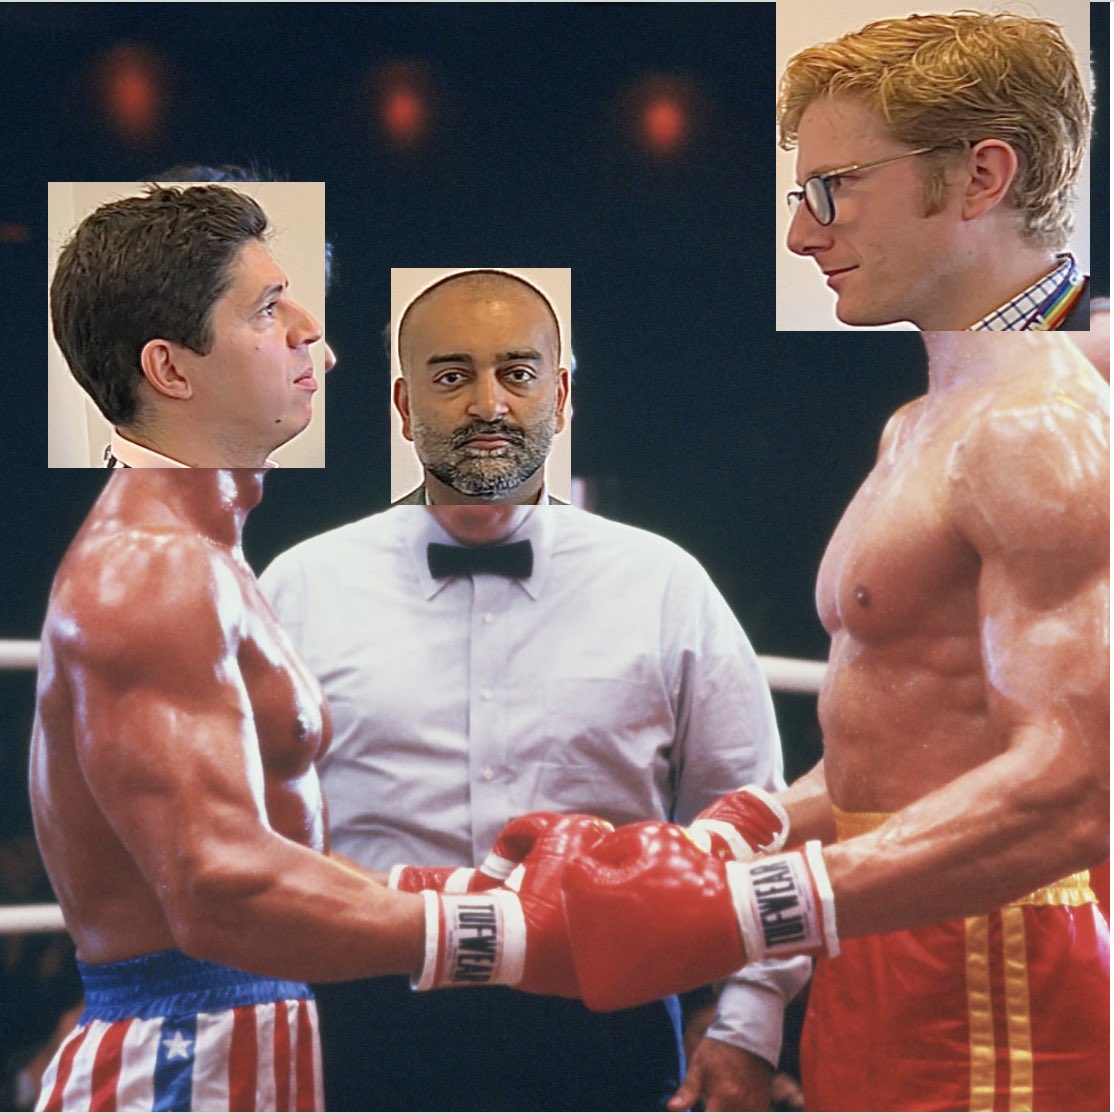 @RNOHRotation see you at regional teaching 9/11/23 for a day full of hip fun including a cement vs uncemented face off! Ali vs McCulloch! Deep fake image below…..